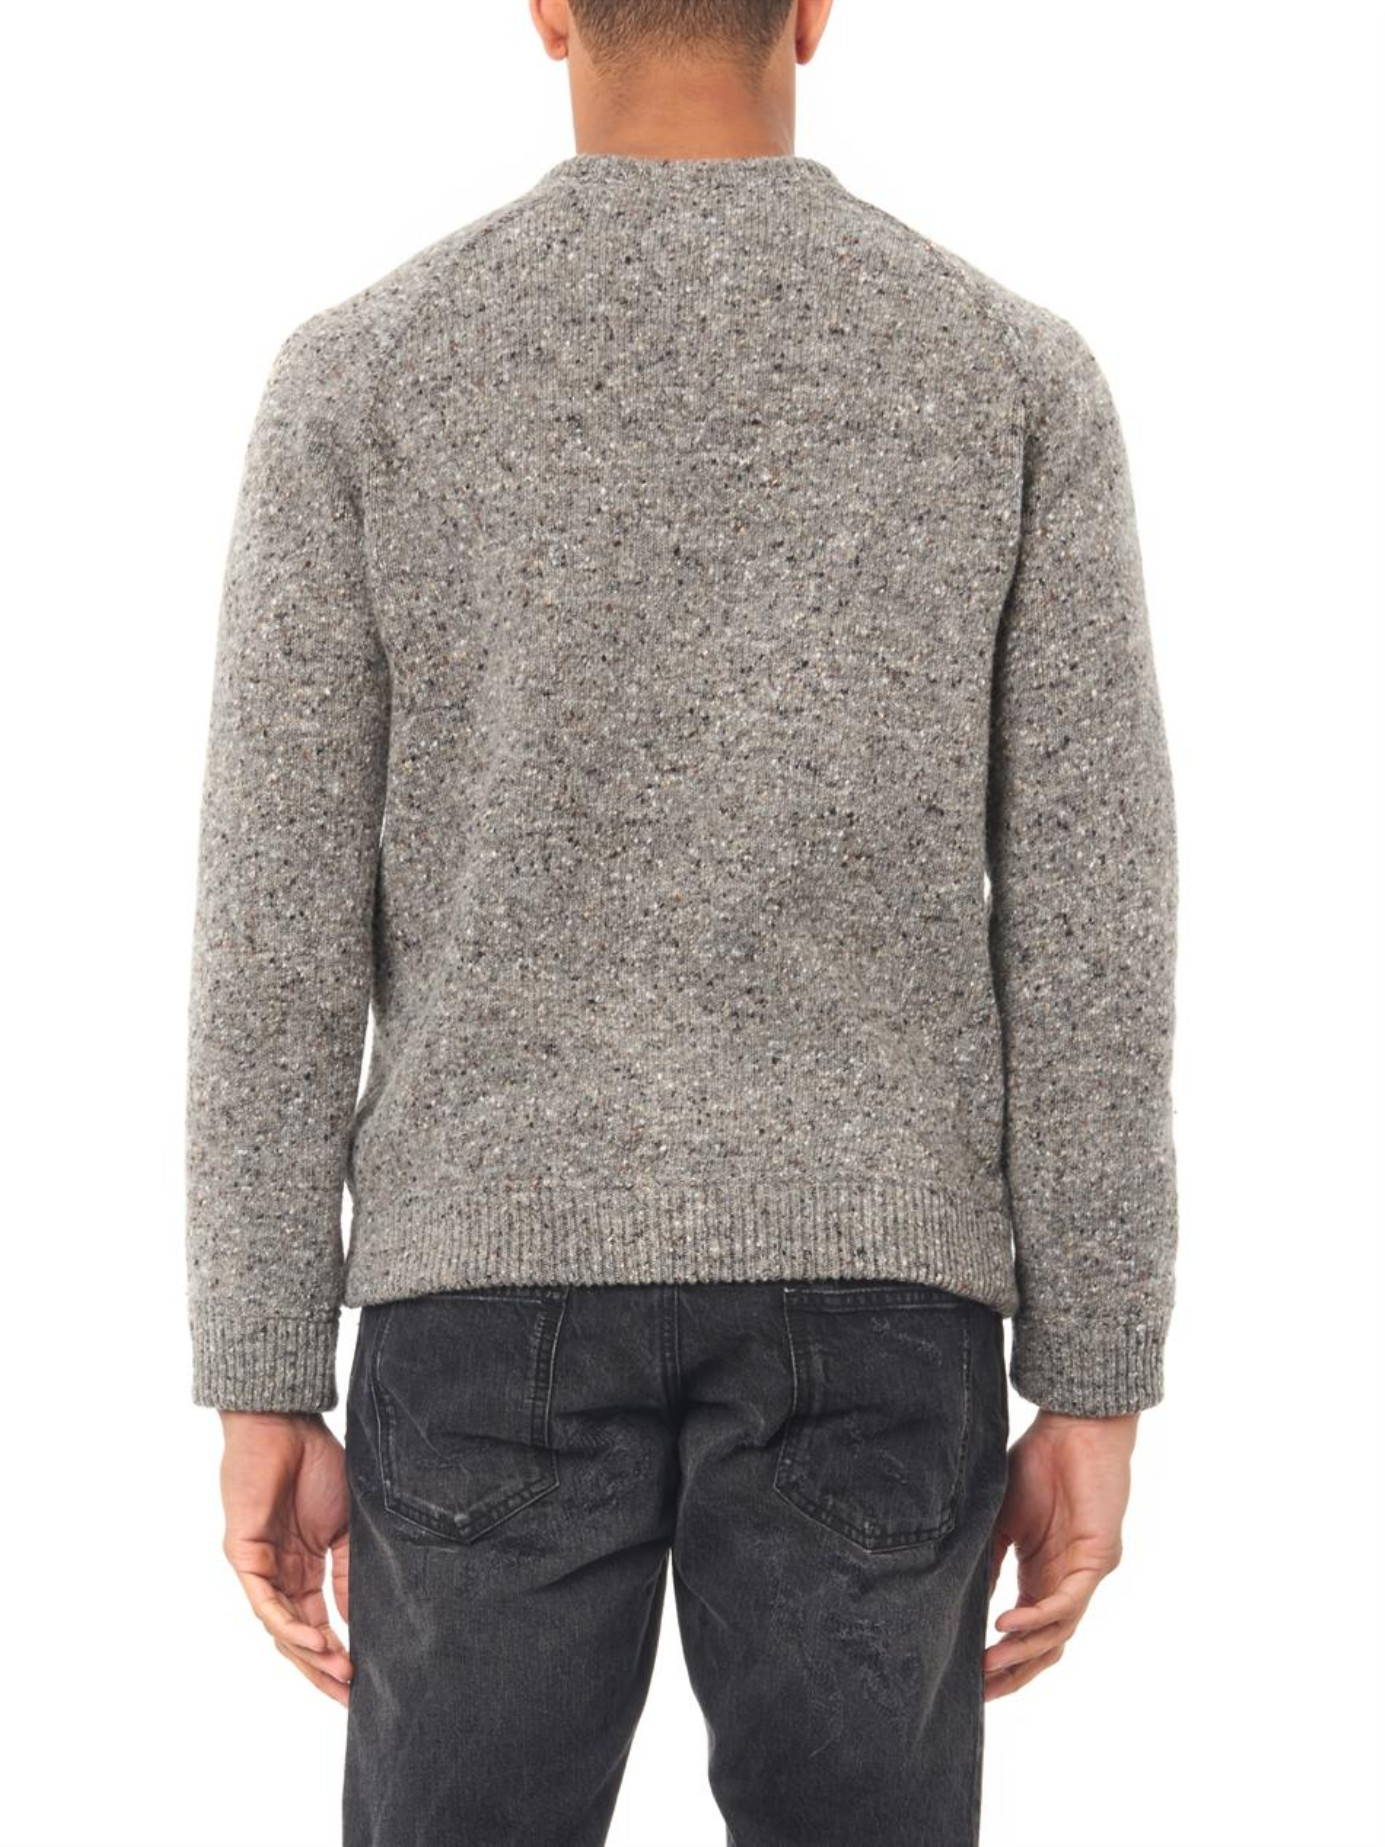 Valentino Salt And Pepper-knit Sweater in Gray for Men | Lyst